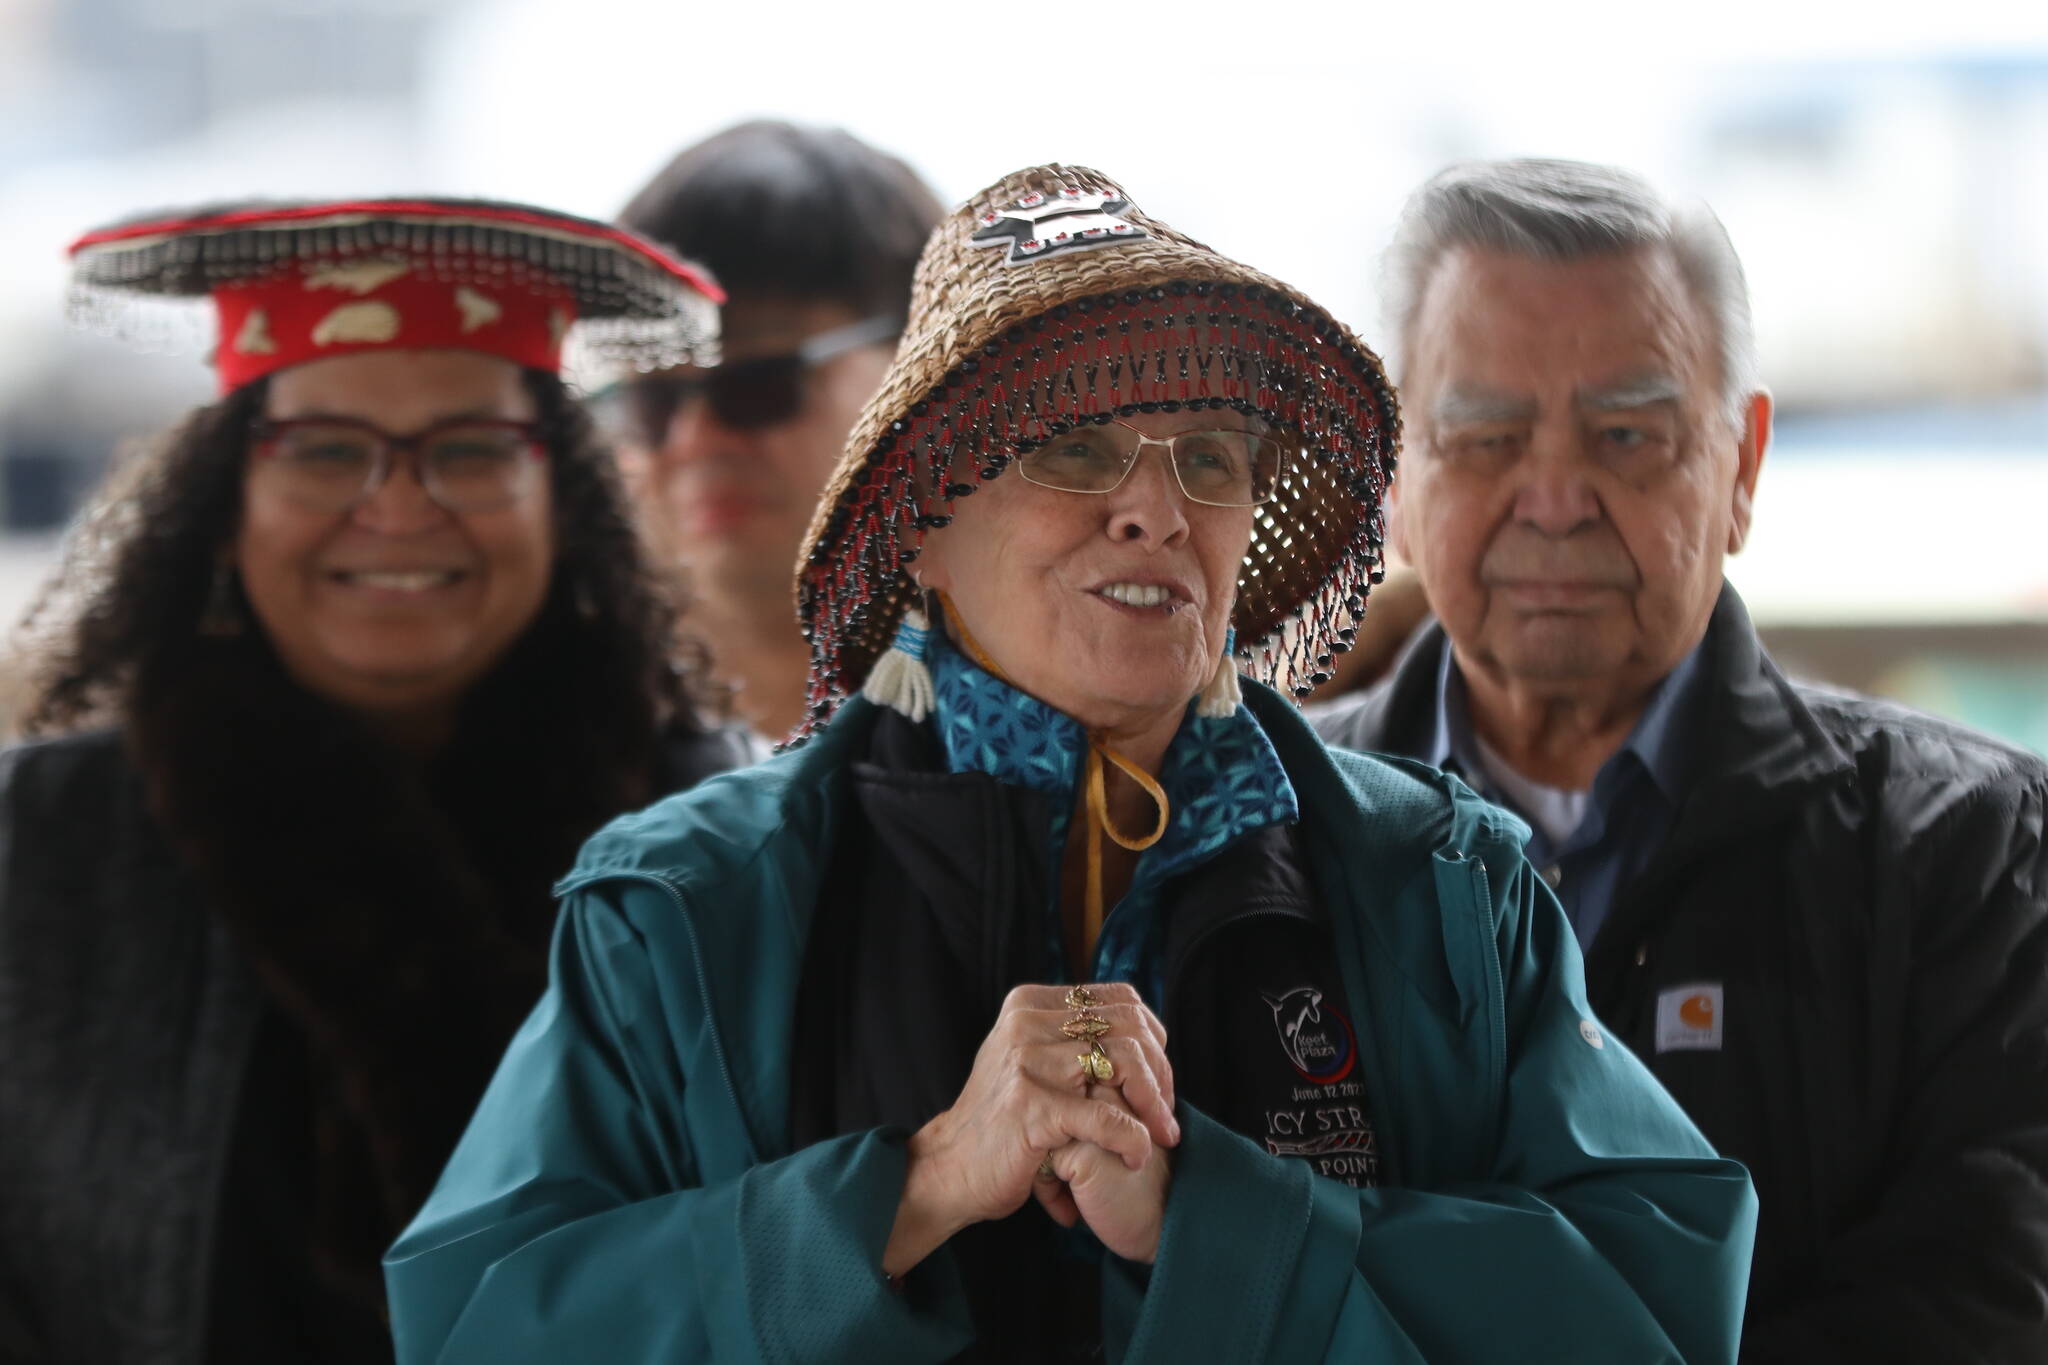 Áakʼw Ḵwáan spokesperson Fran Houston addresses a crowd of people during a blessing ceremony on Friday at Marine Park as part of the Kootéeyaa Deiyí (Totem Pole Trail) that will run along the downtown Juneau waterfront. (Jonson Kuhn / Juneau Empire)